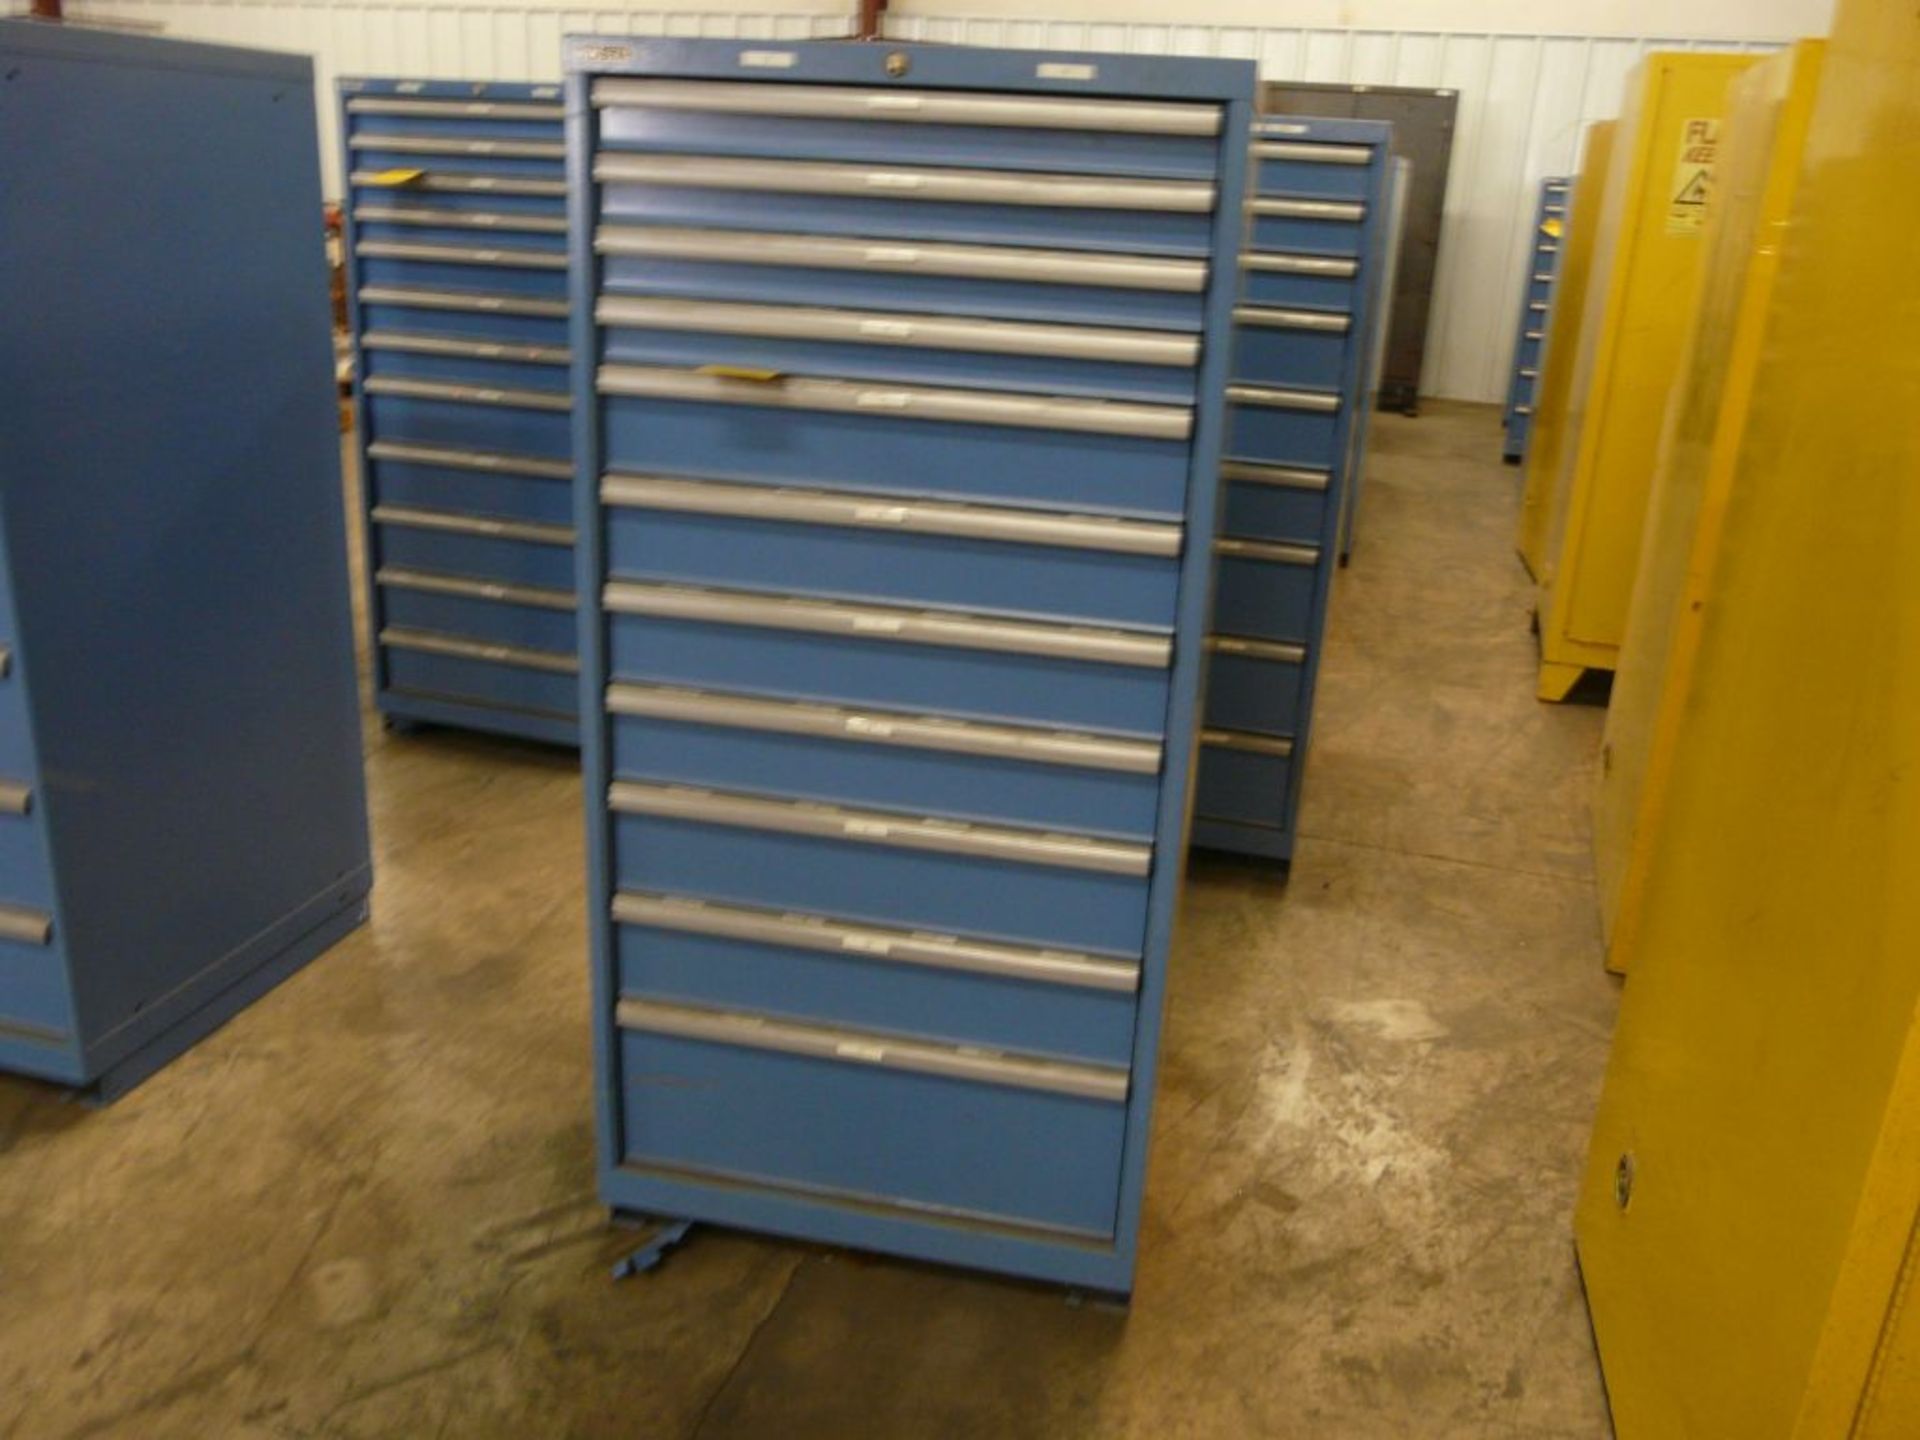 Lista 11-Drawer Cabinet - 28-1/2"W x 28-1/2"L x 59-1/2"H; Tag: 218667 - Image 2 of 4